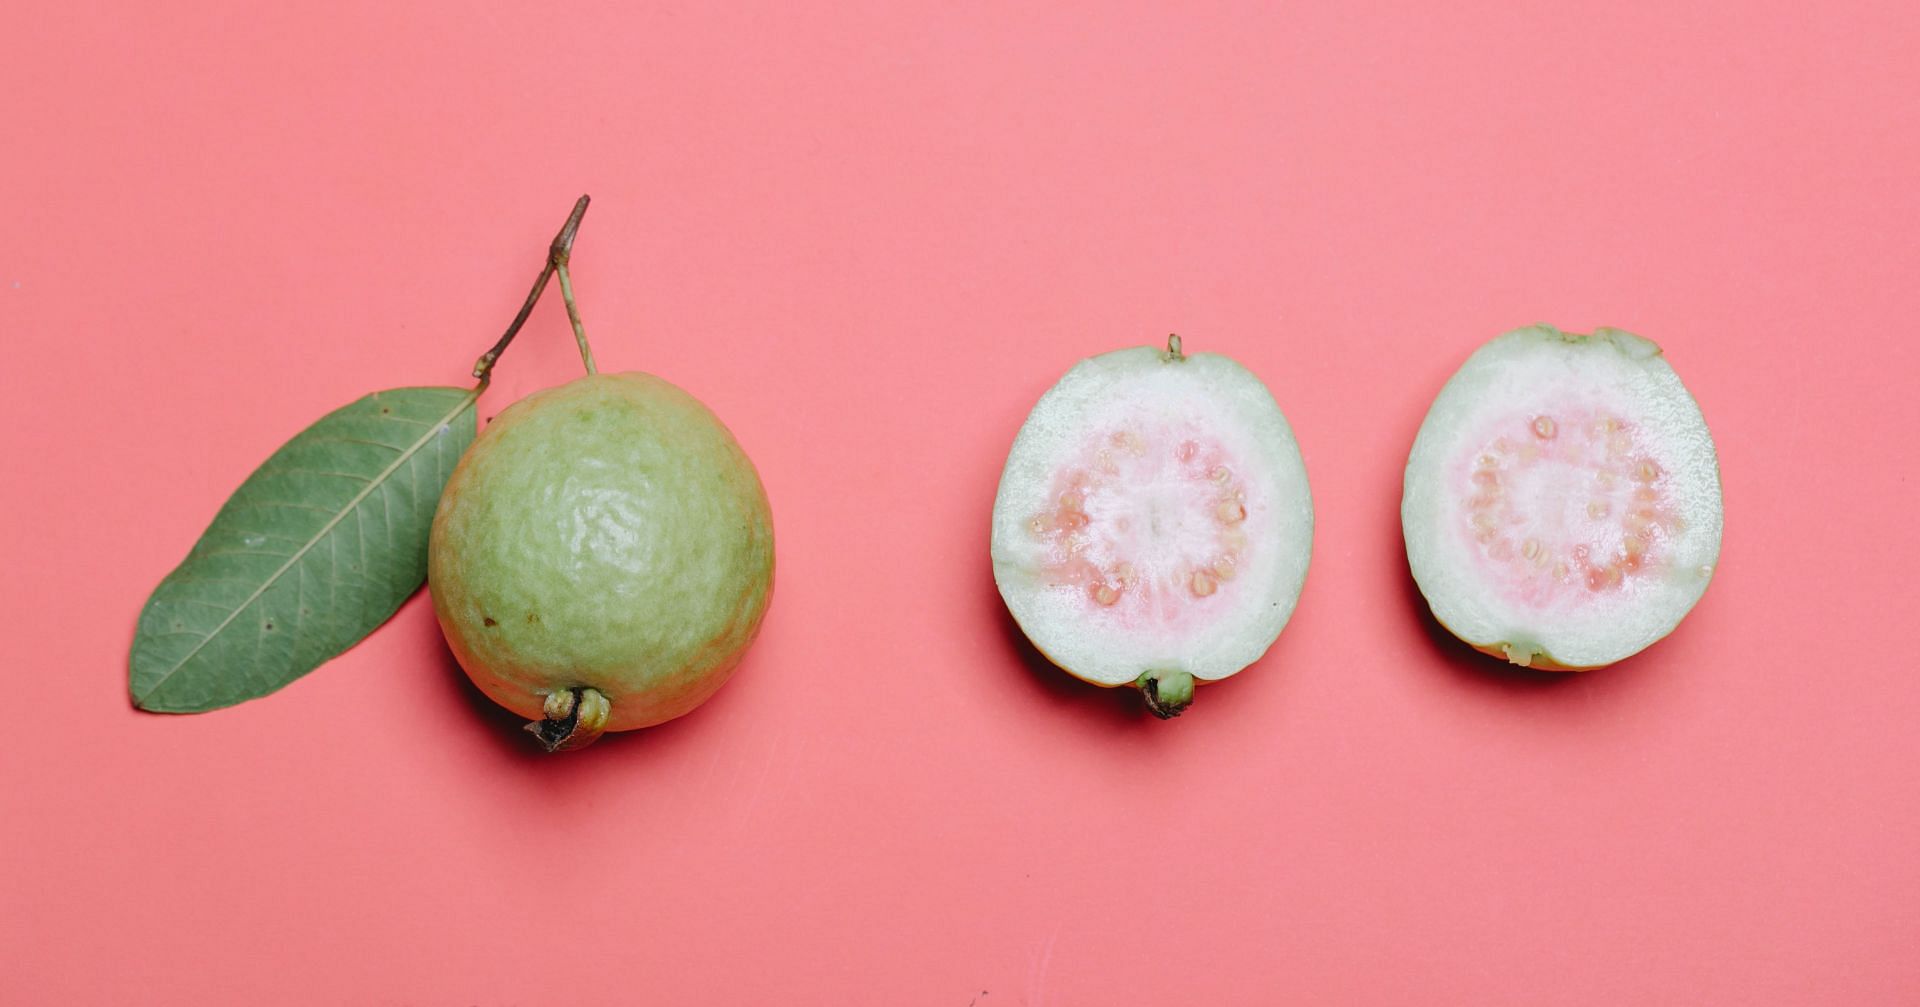 There are several benefits of guava leaves. (Image via Pexels/ Any Lane)